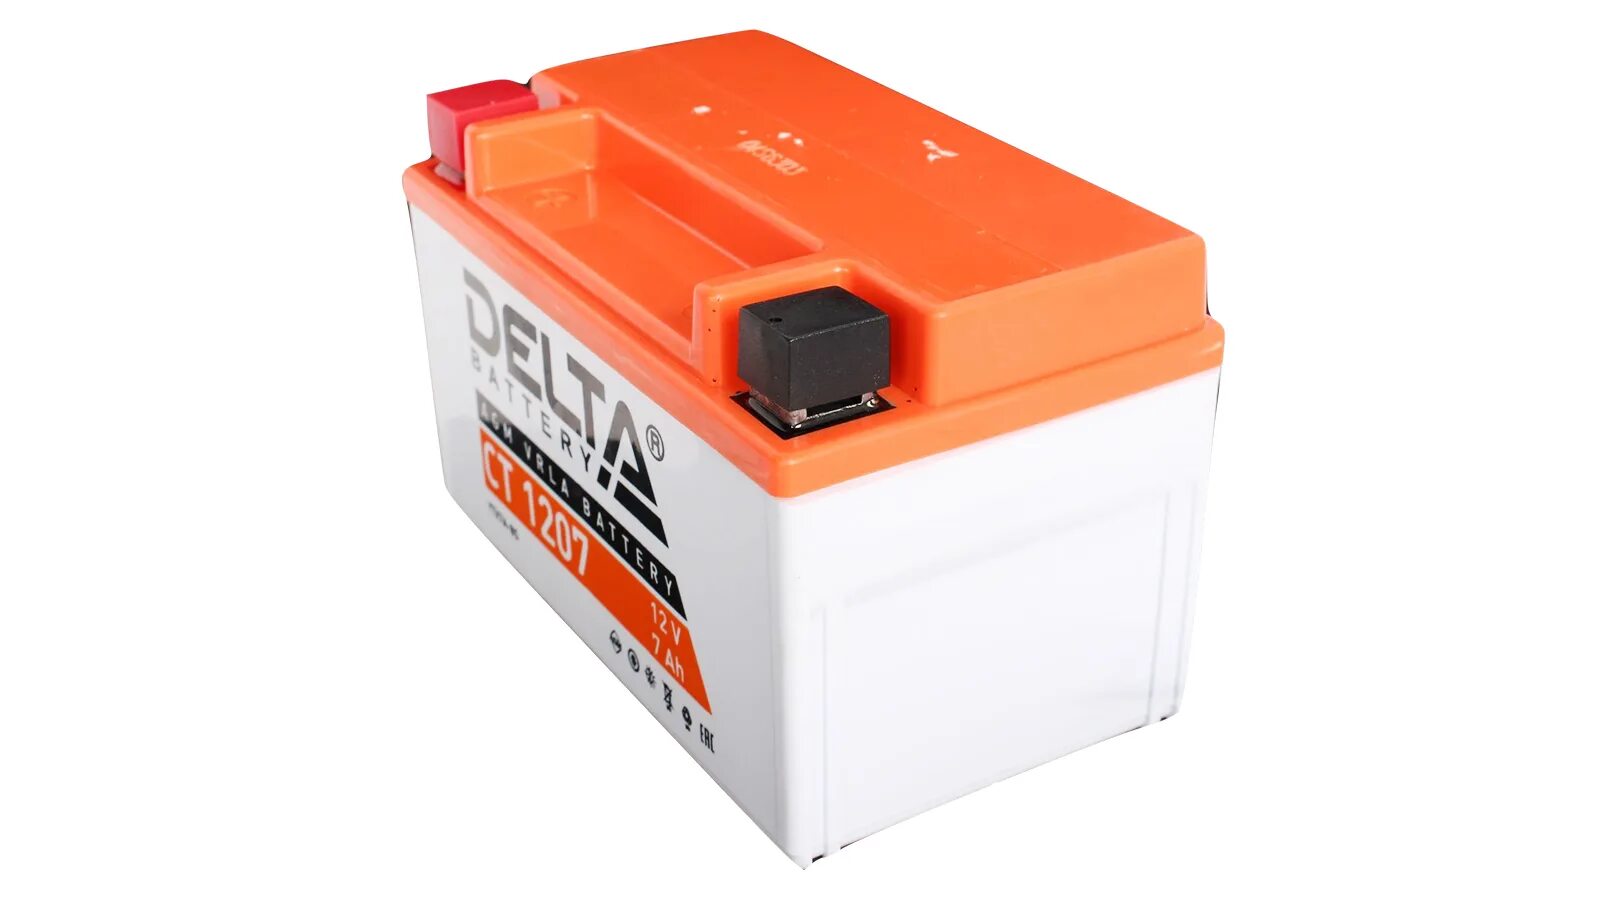 Battery 1207. Аккумулятор Delta ст1207. Delta Battery ct1207 12в / 7а·ч. Аккумулятор 12в 7а ст1207. АКБ Delta Red Energy li-ion 1207 ytx7a-BS.